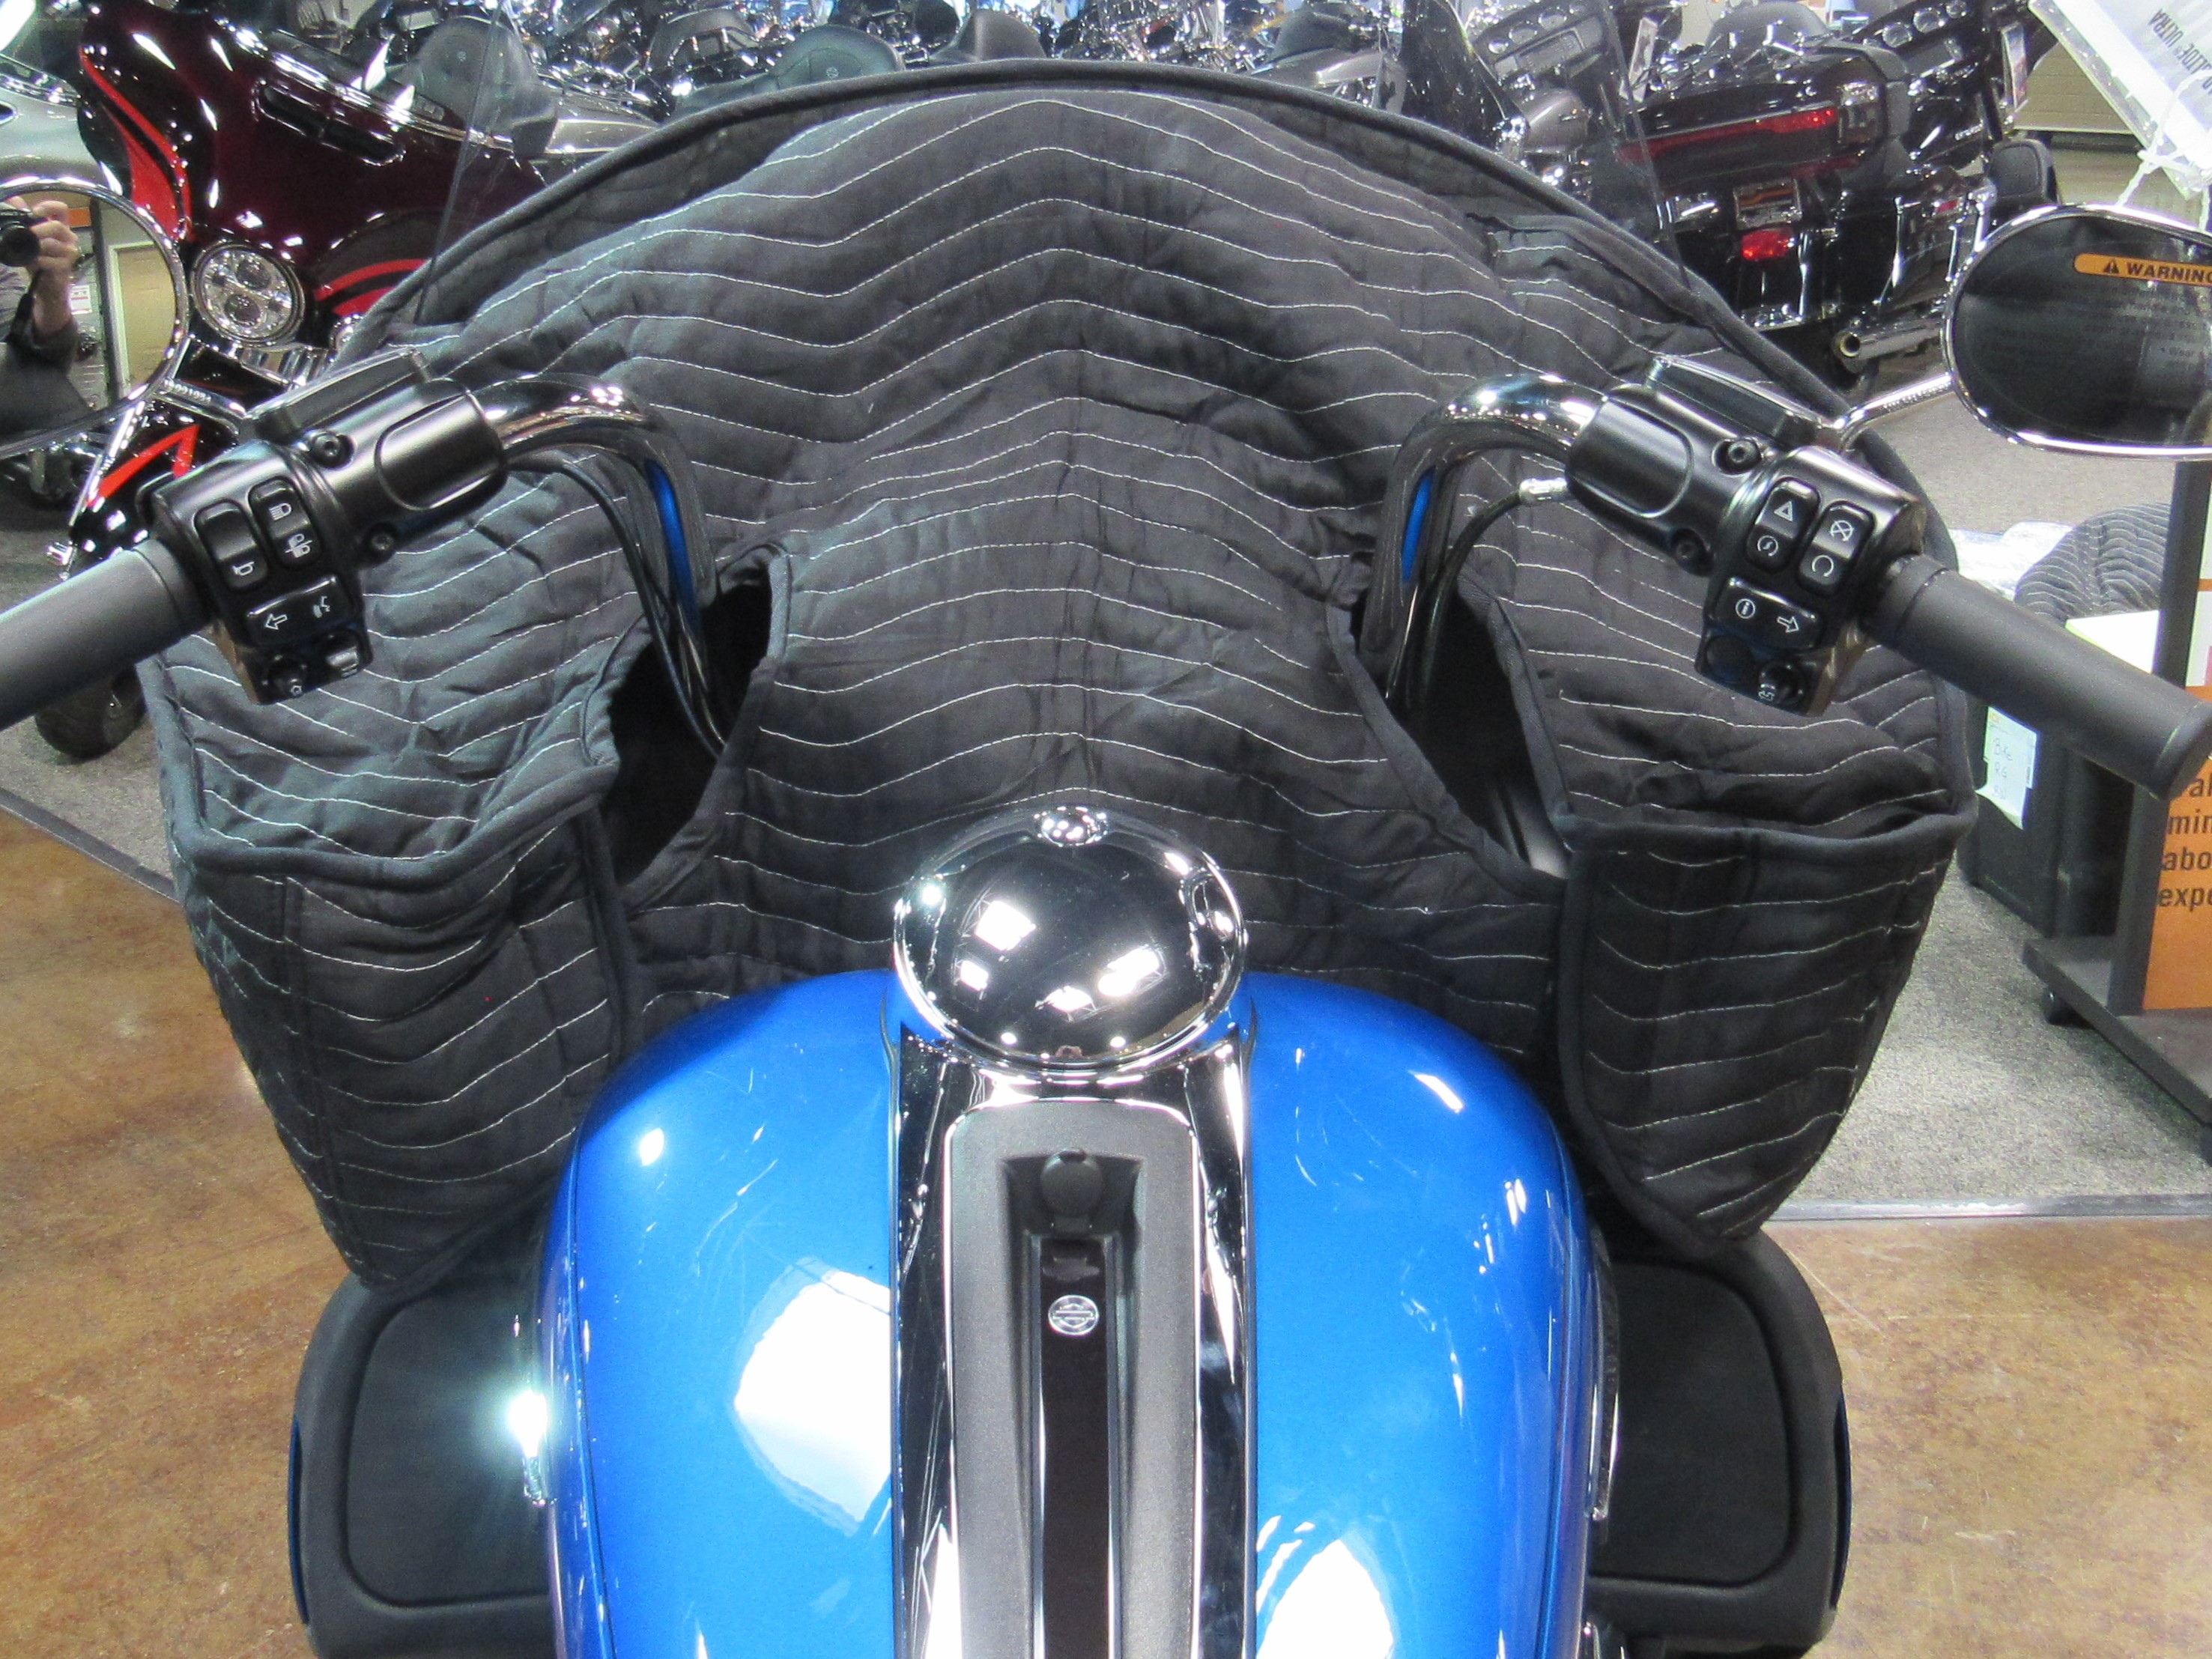 HARLEY DAVIDSON ROADGLIDE FAIRING COVER - Click Image to Close